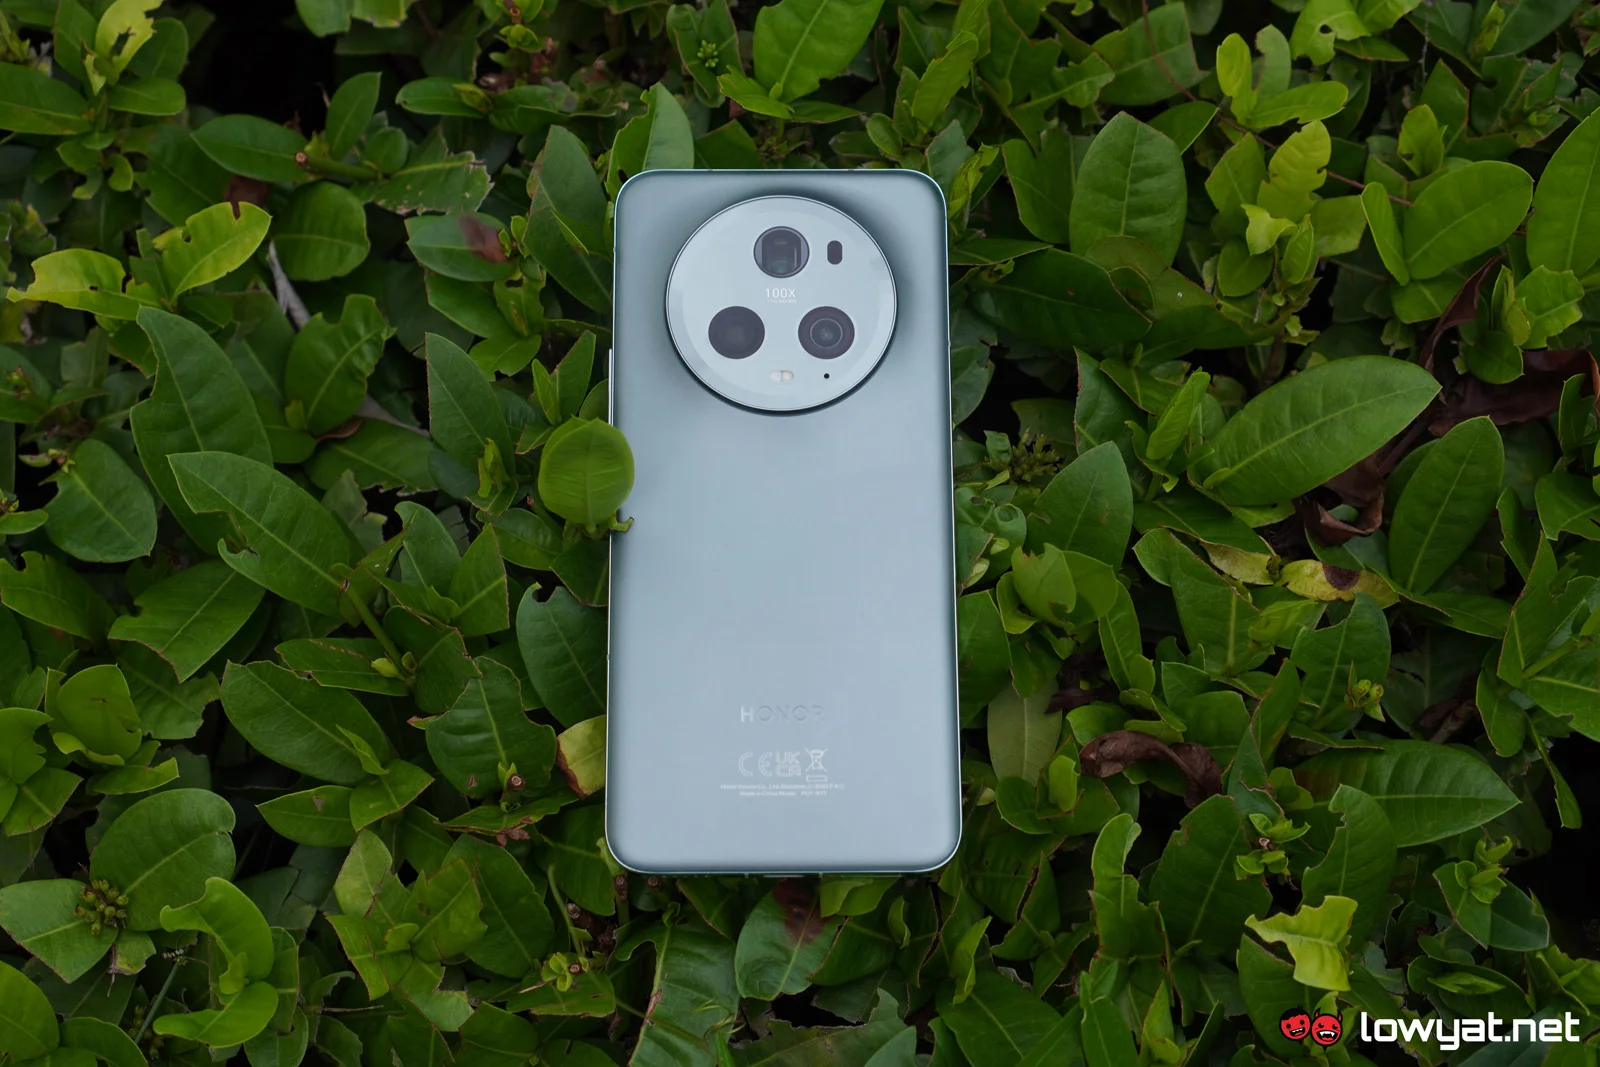 HONOR Magic 5 Pro review: Muscling in on the competition